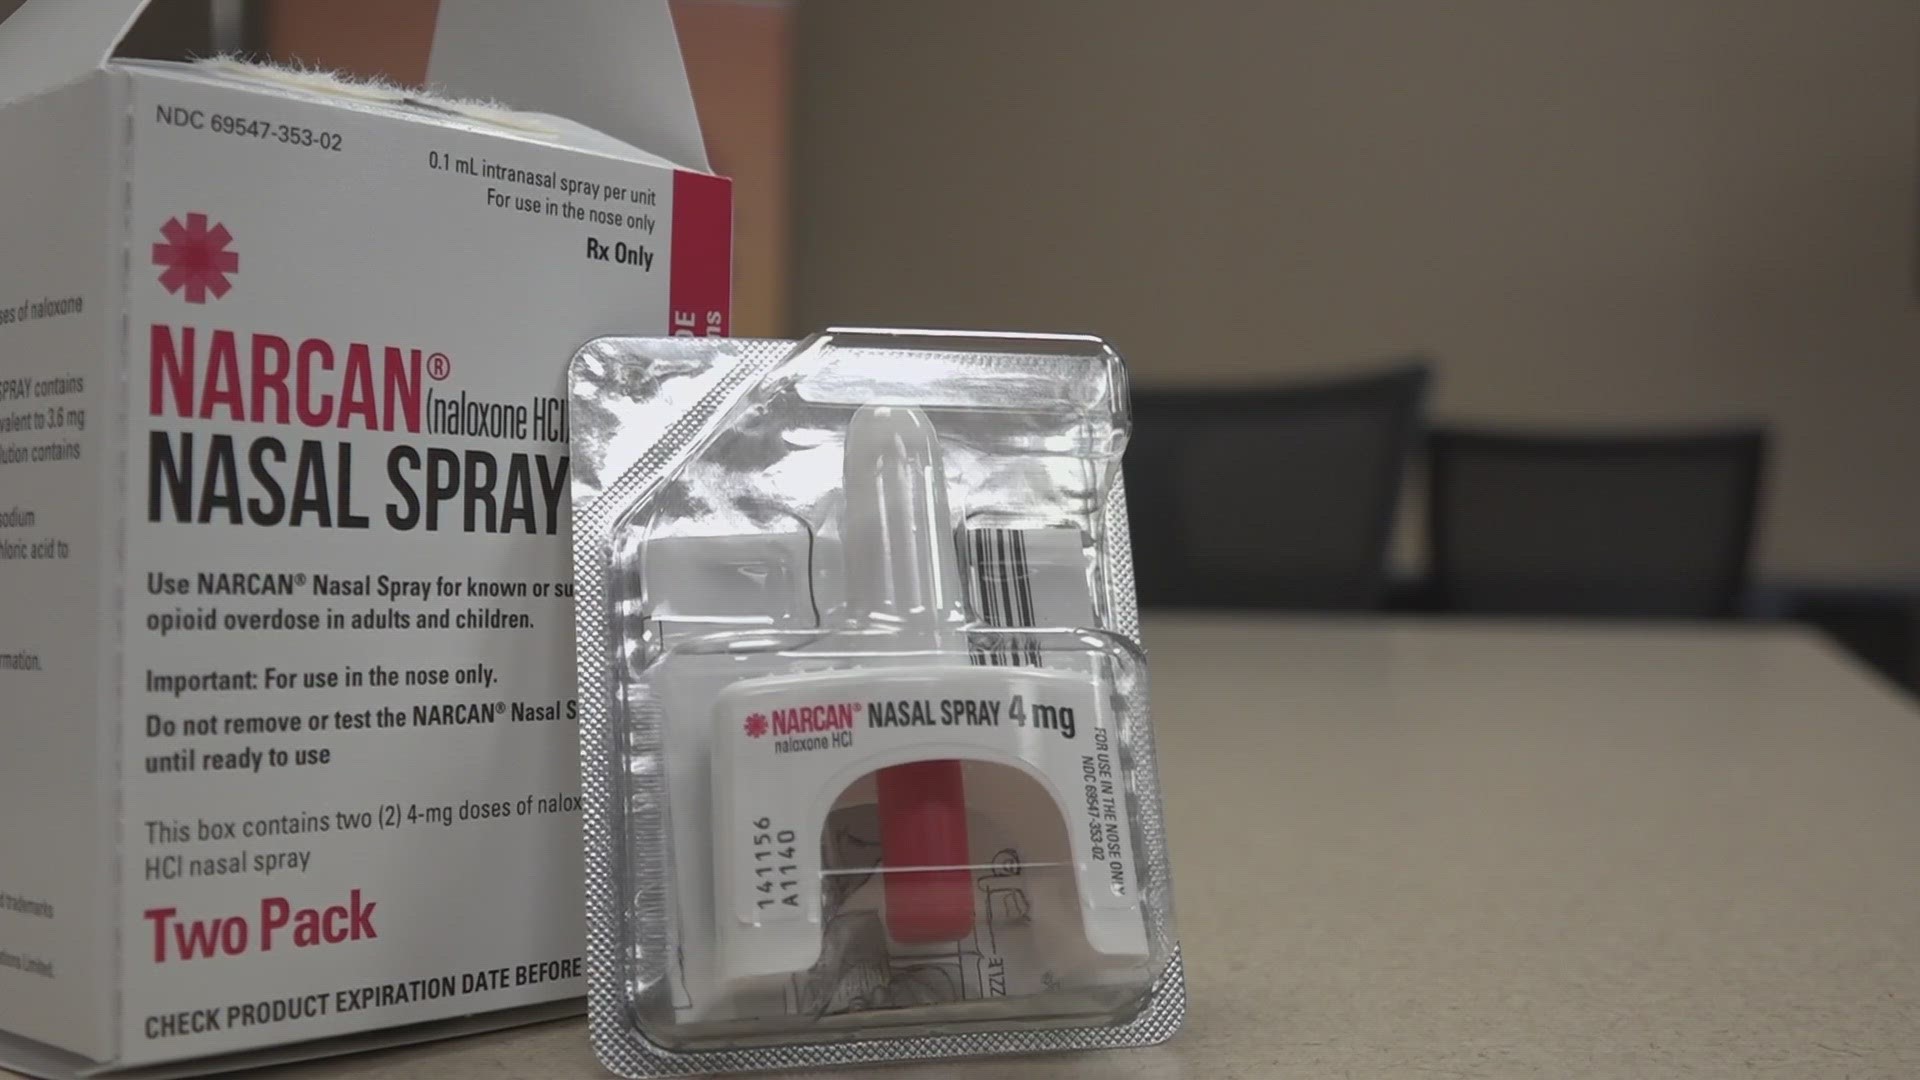 How much this will impact the nationwide overdose crisis is not clear, even though better access to Narcan, a name-brand version of naloxone, is a priority.